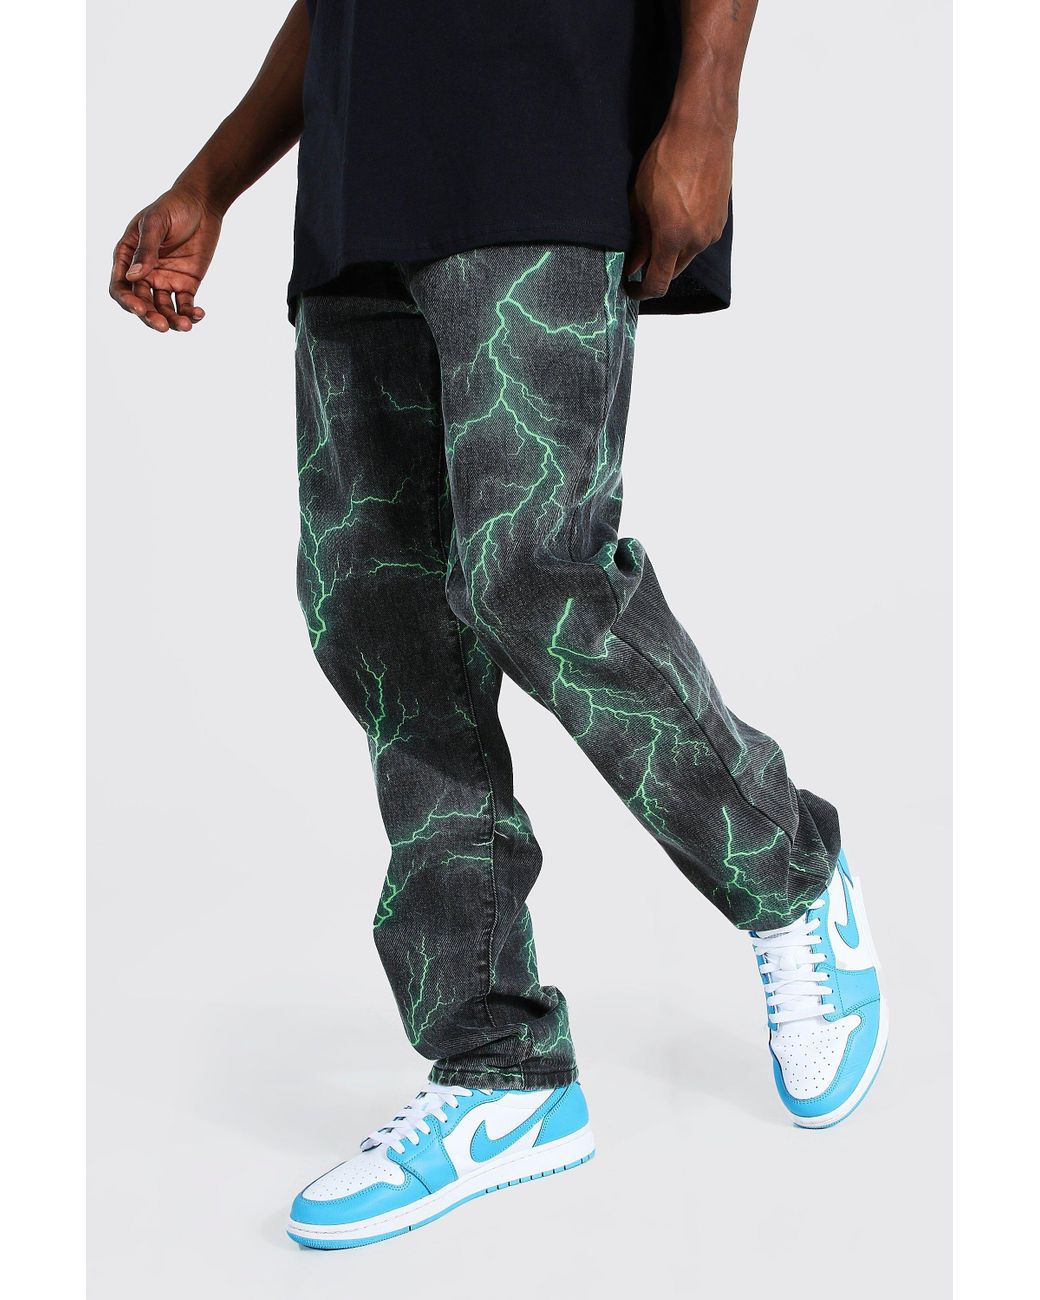 BoohooMAN Relaxed Fit Lightning Printed Jeans in Green for Men | Lyst UK